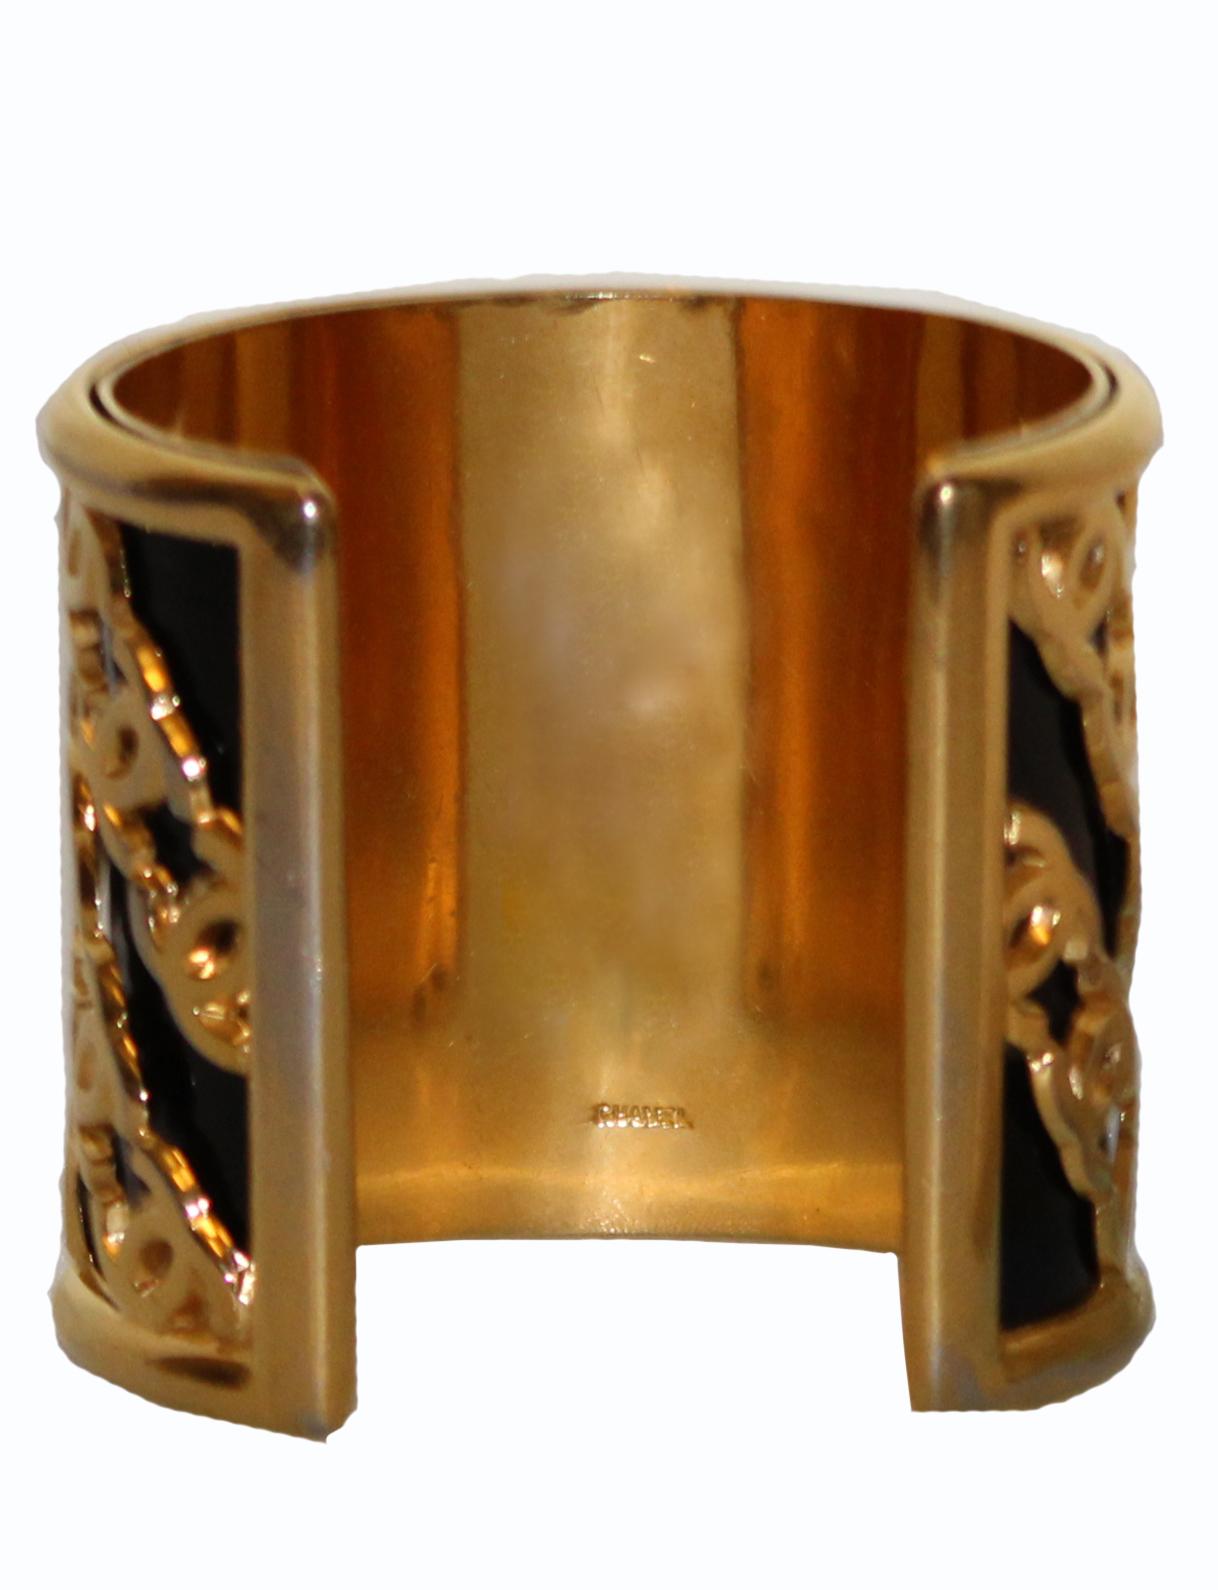 Chanel.  Every woman knows this iconic brand.  In style for over 100 years with no end of interest in sight!  Offering a rare find!  This 1950's gold tone open end cuff is a statement!  1.5